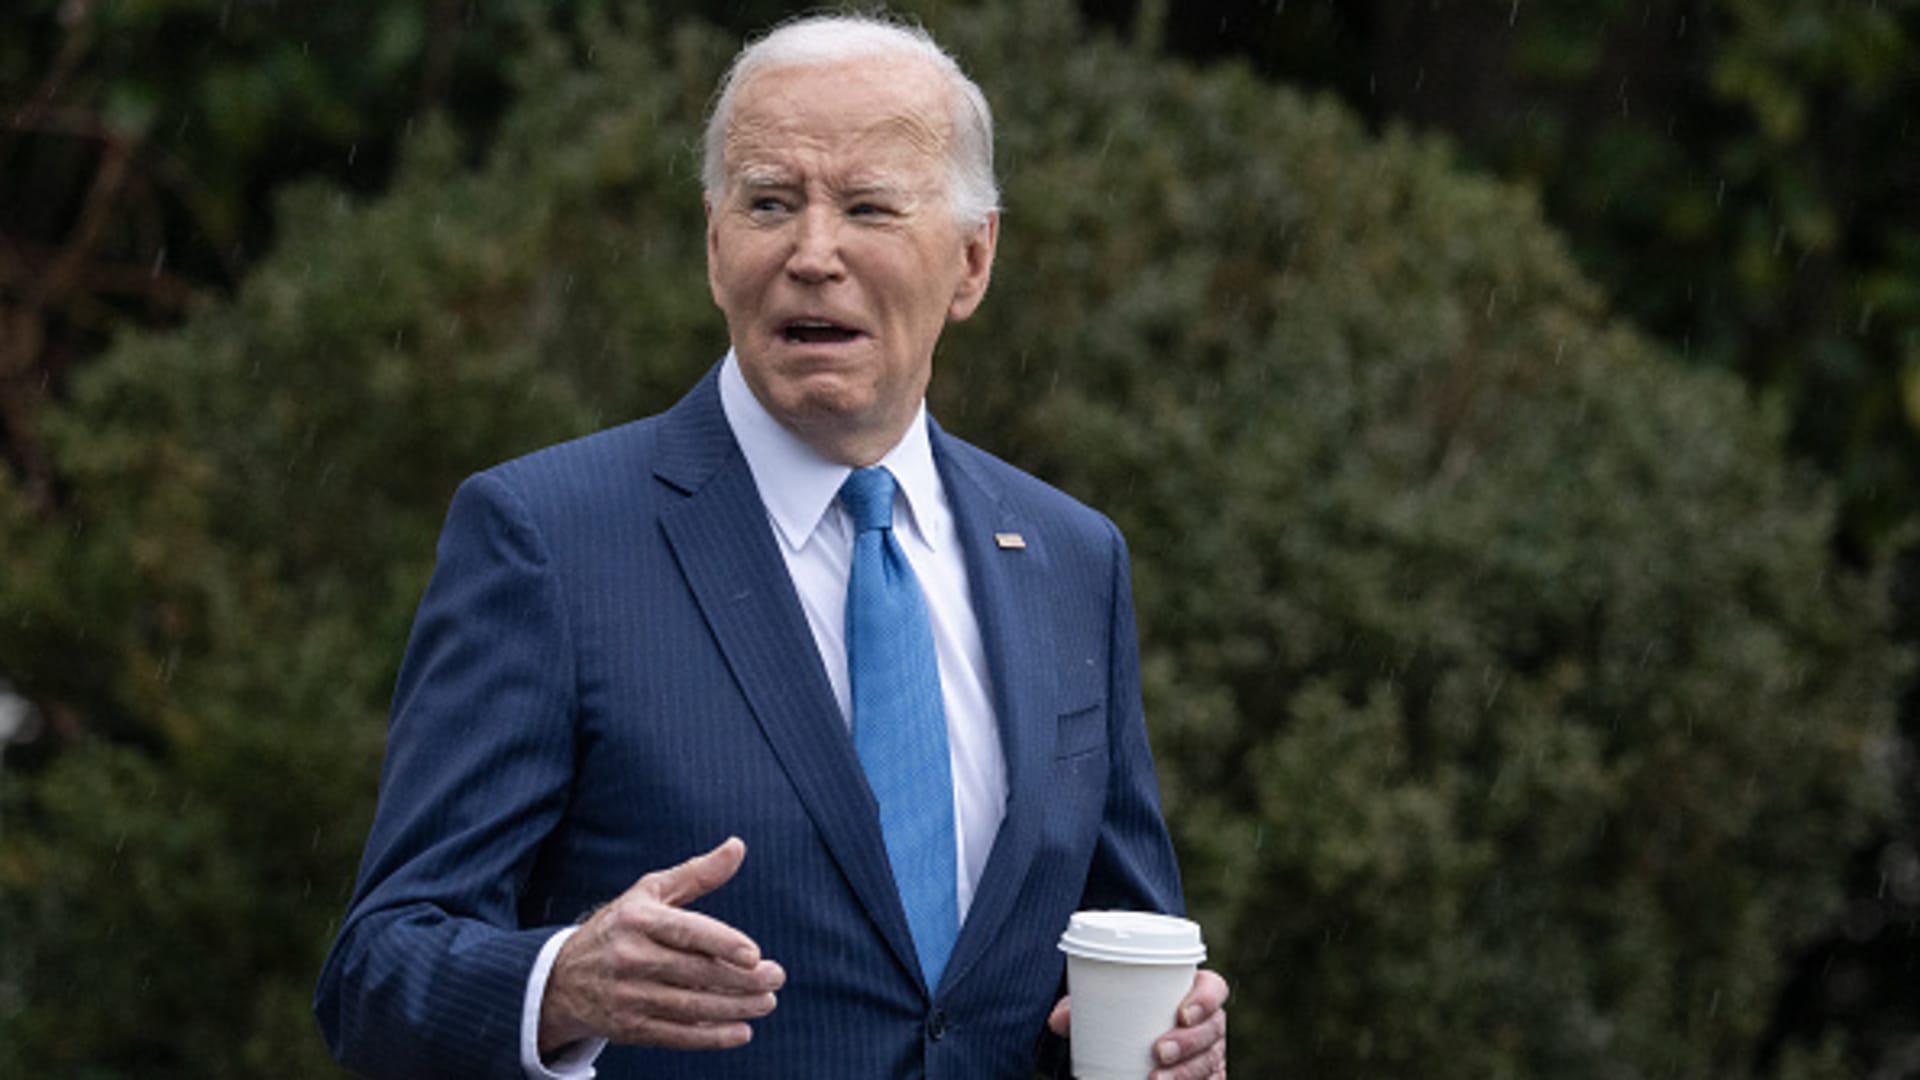 Biden gets annual physical, with fitness for office an election issue